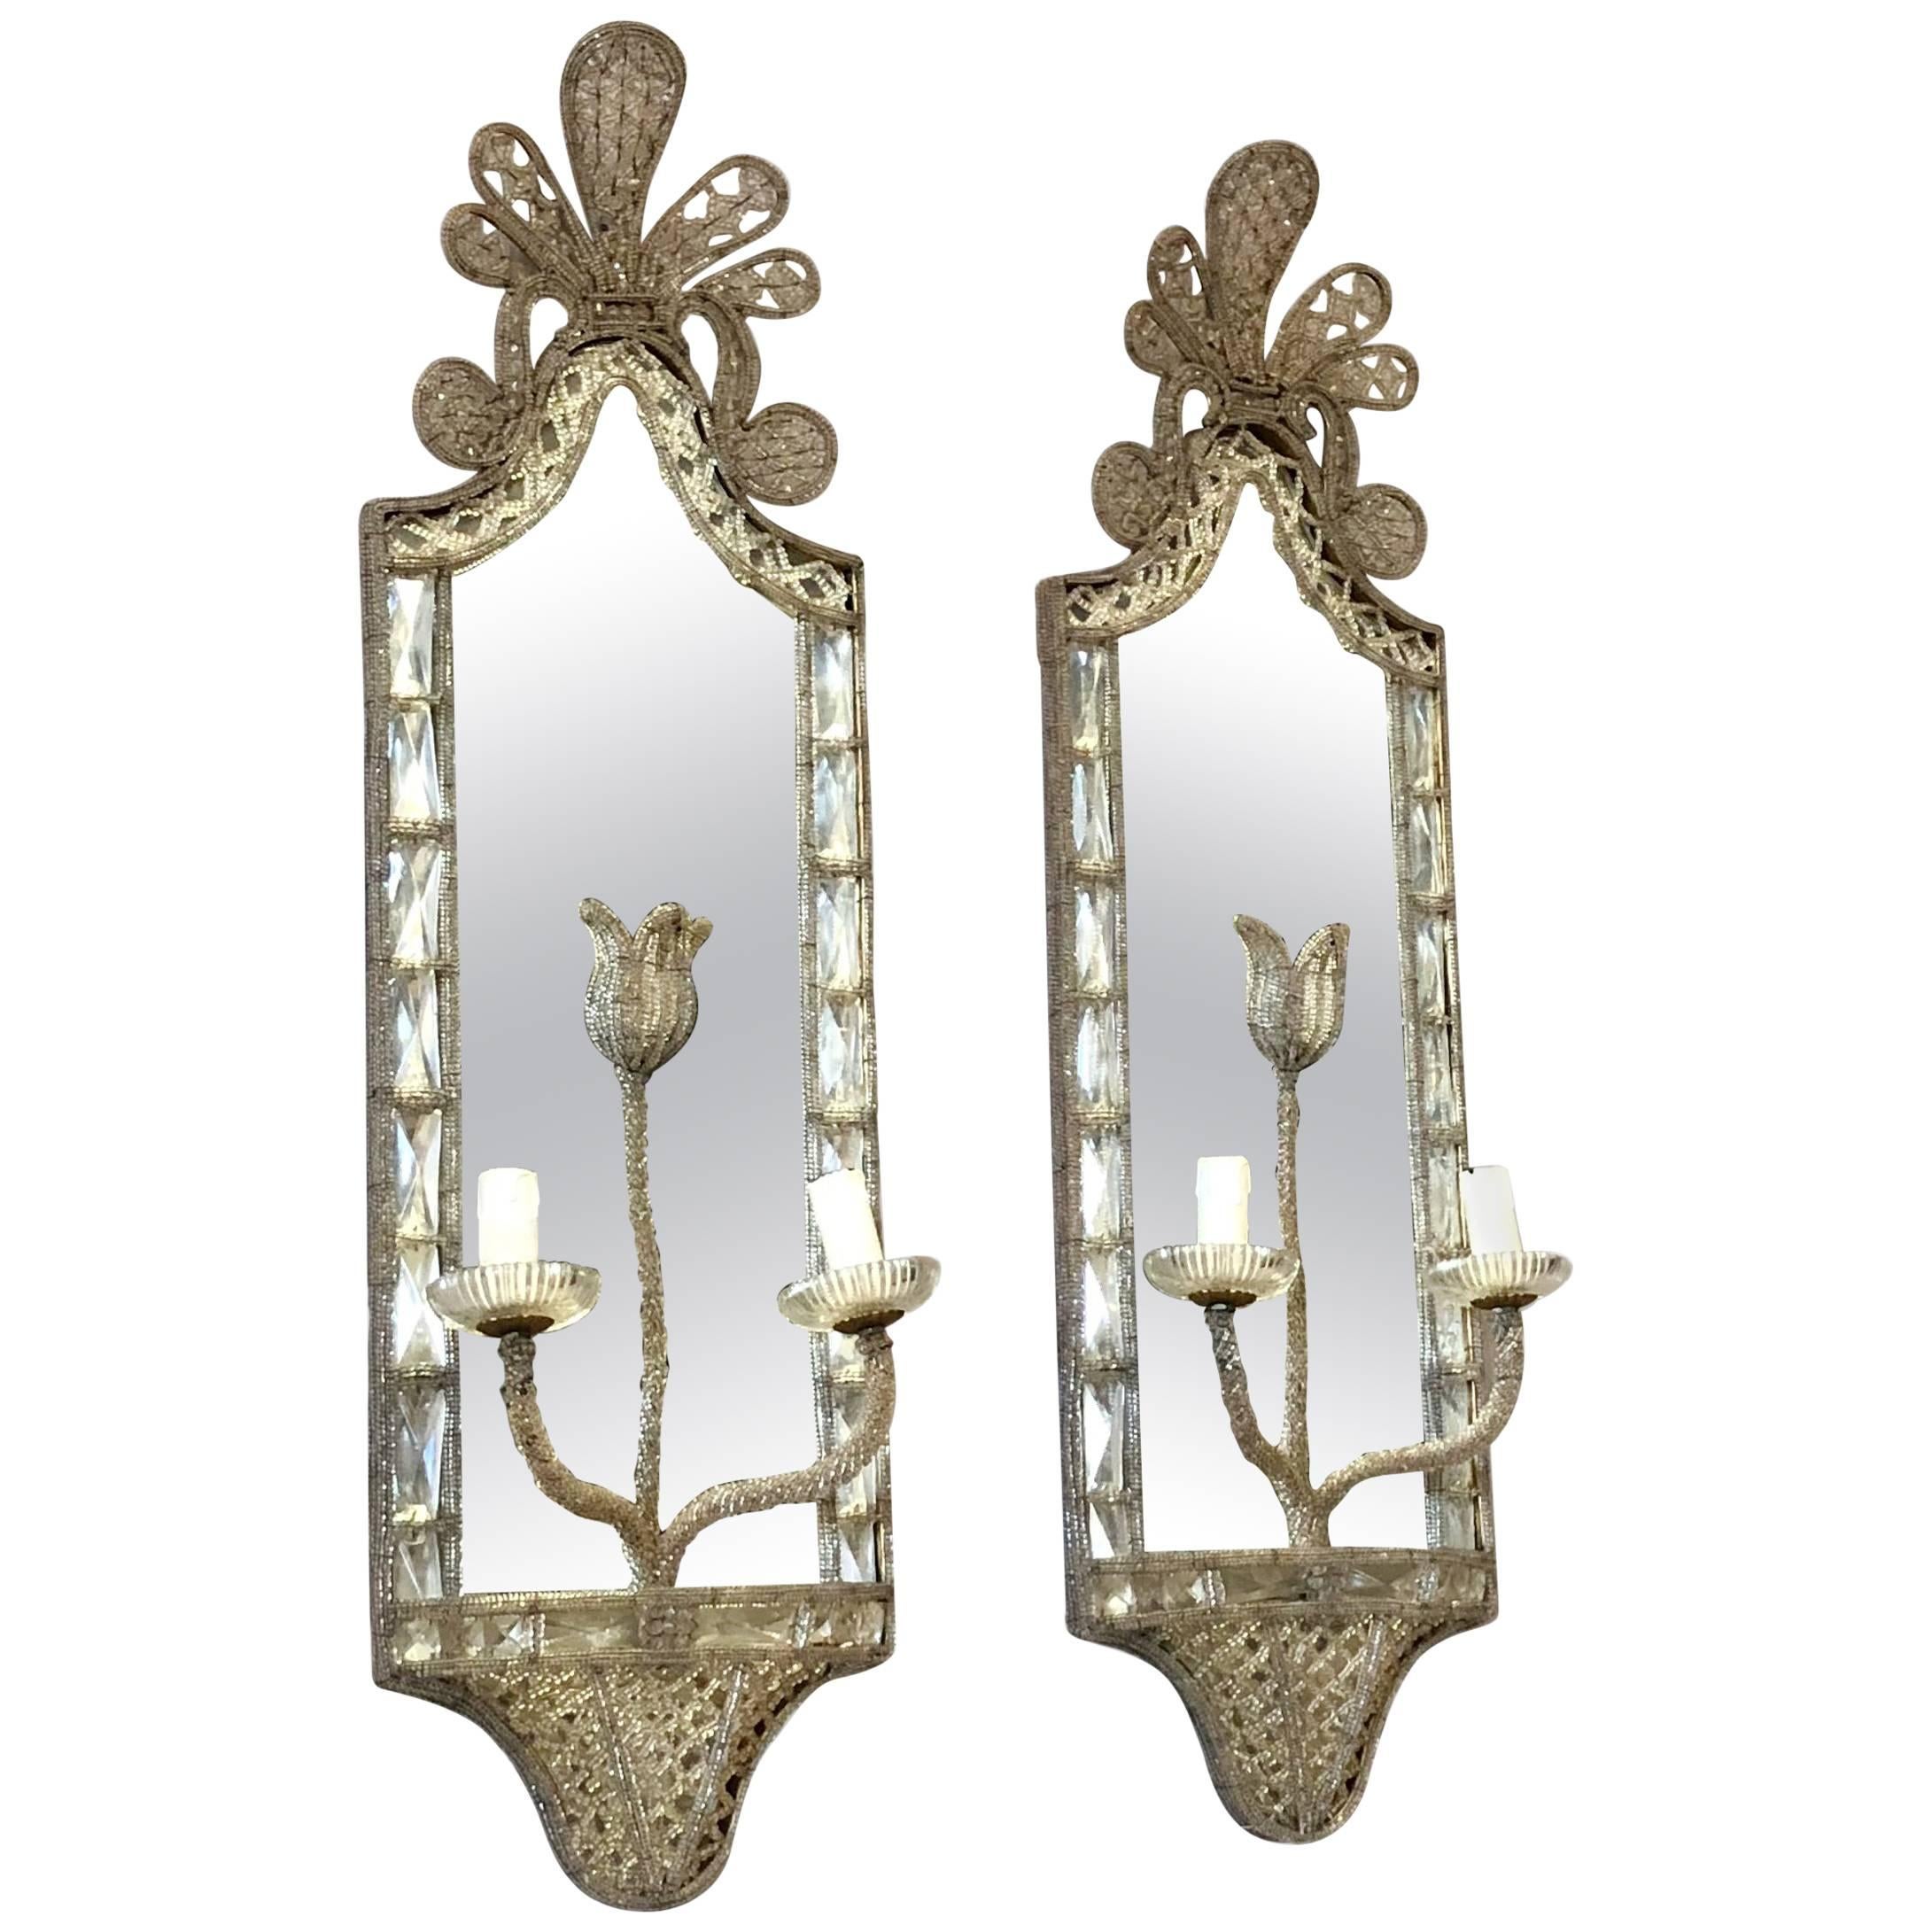 Pair of French Exquisite Crystal Wall Sconces with Two Lights and Mirror